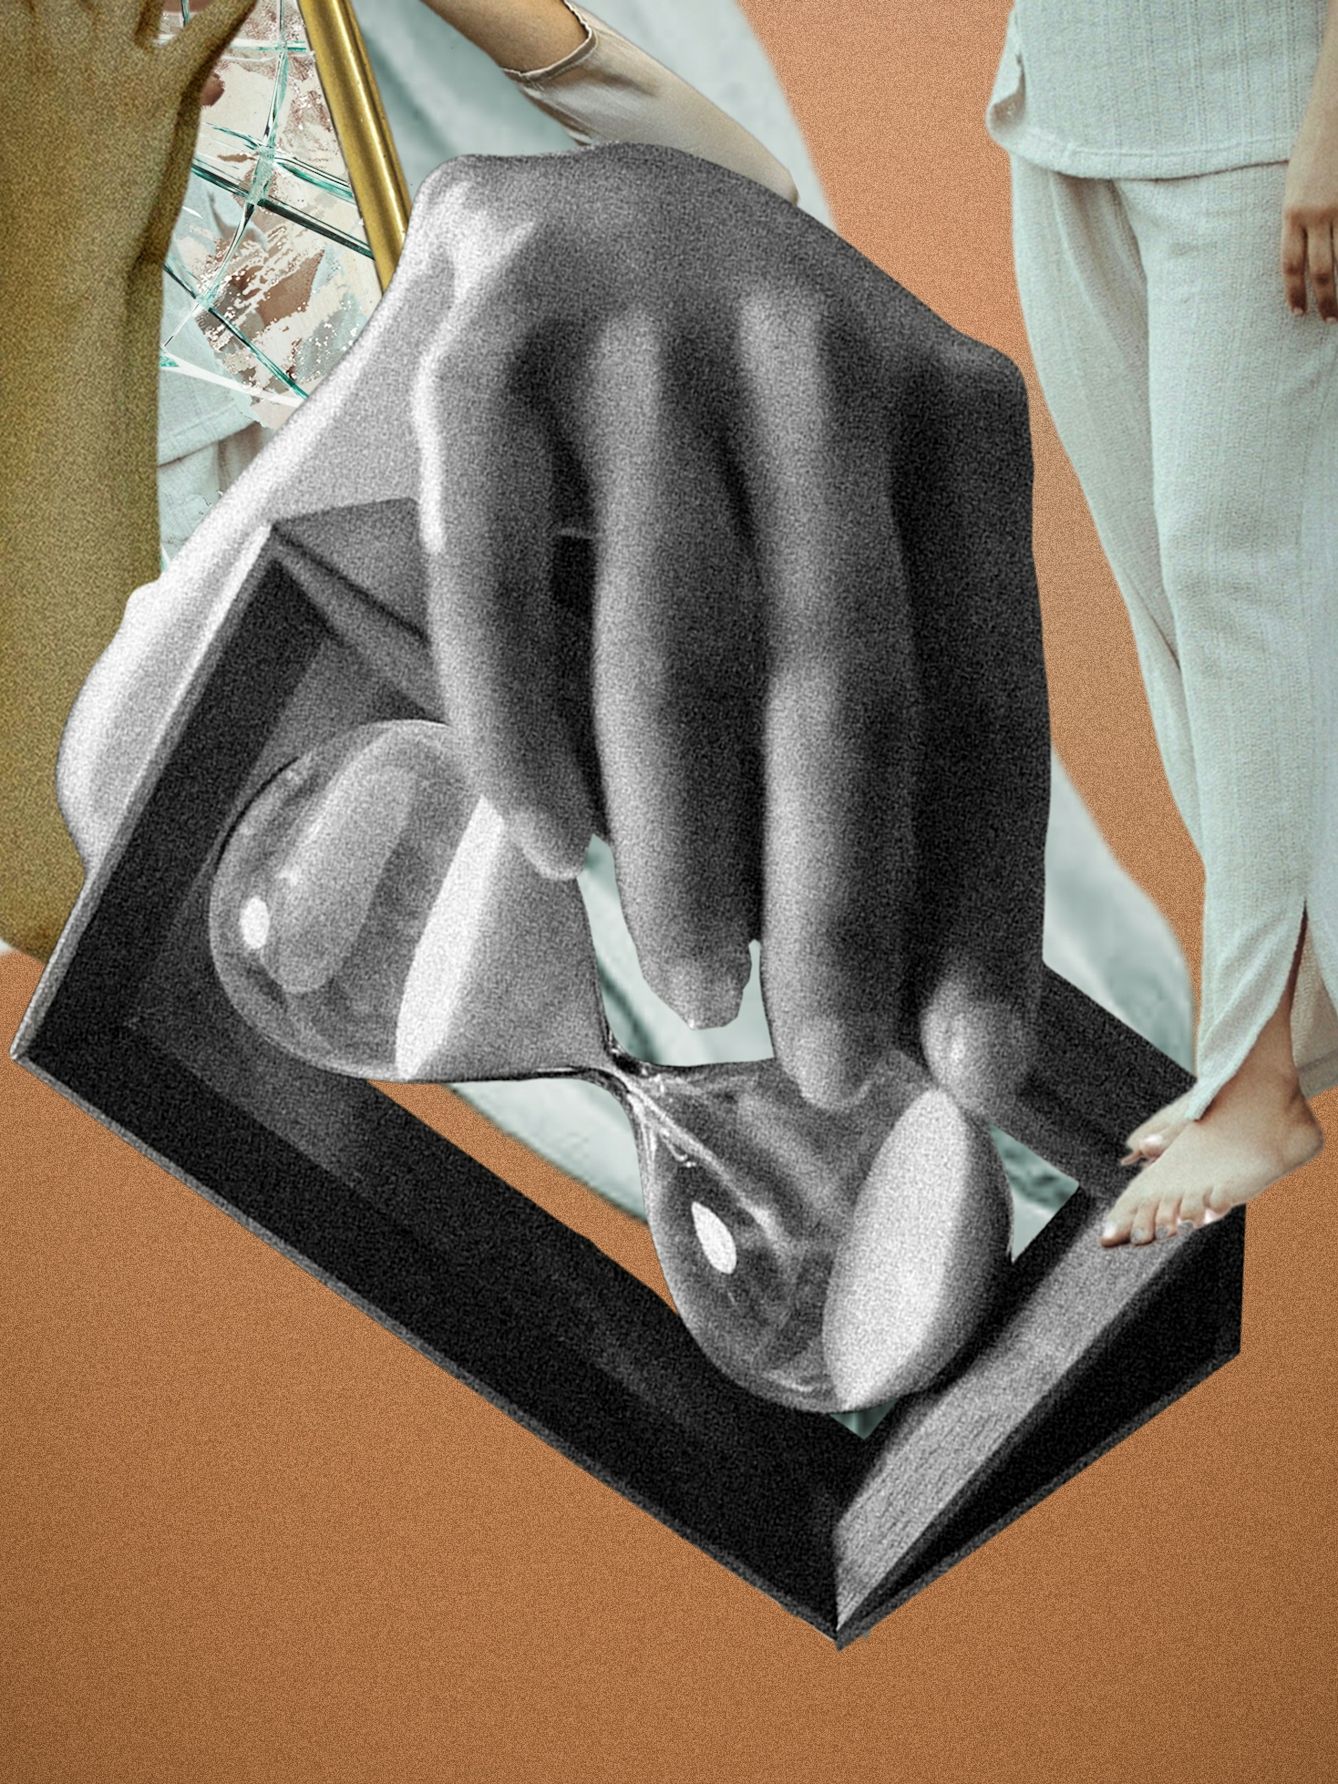 Detail from the larger digital collage artwork at the top of the page. This detail shows the large hand reaching for an hour glass.